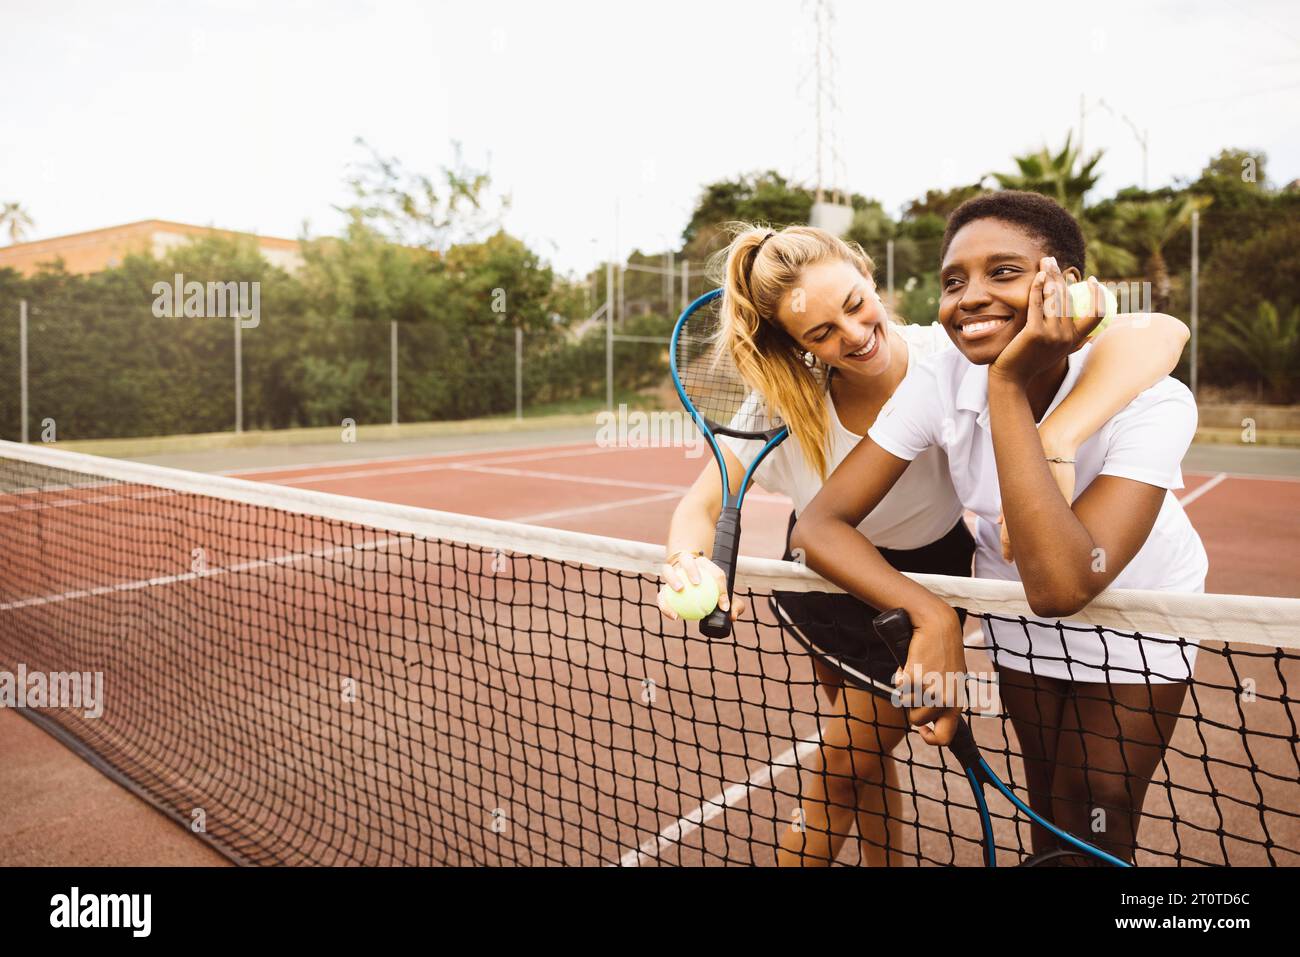 Portrait of two young beautiful women with tennis clothes and rackets in a tennis court ready to play a game. Stock Photo